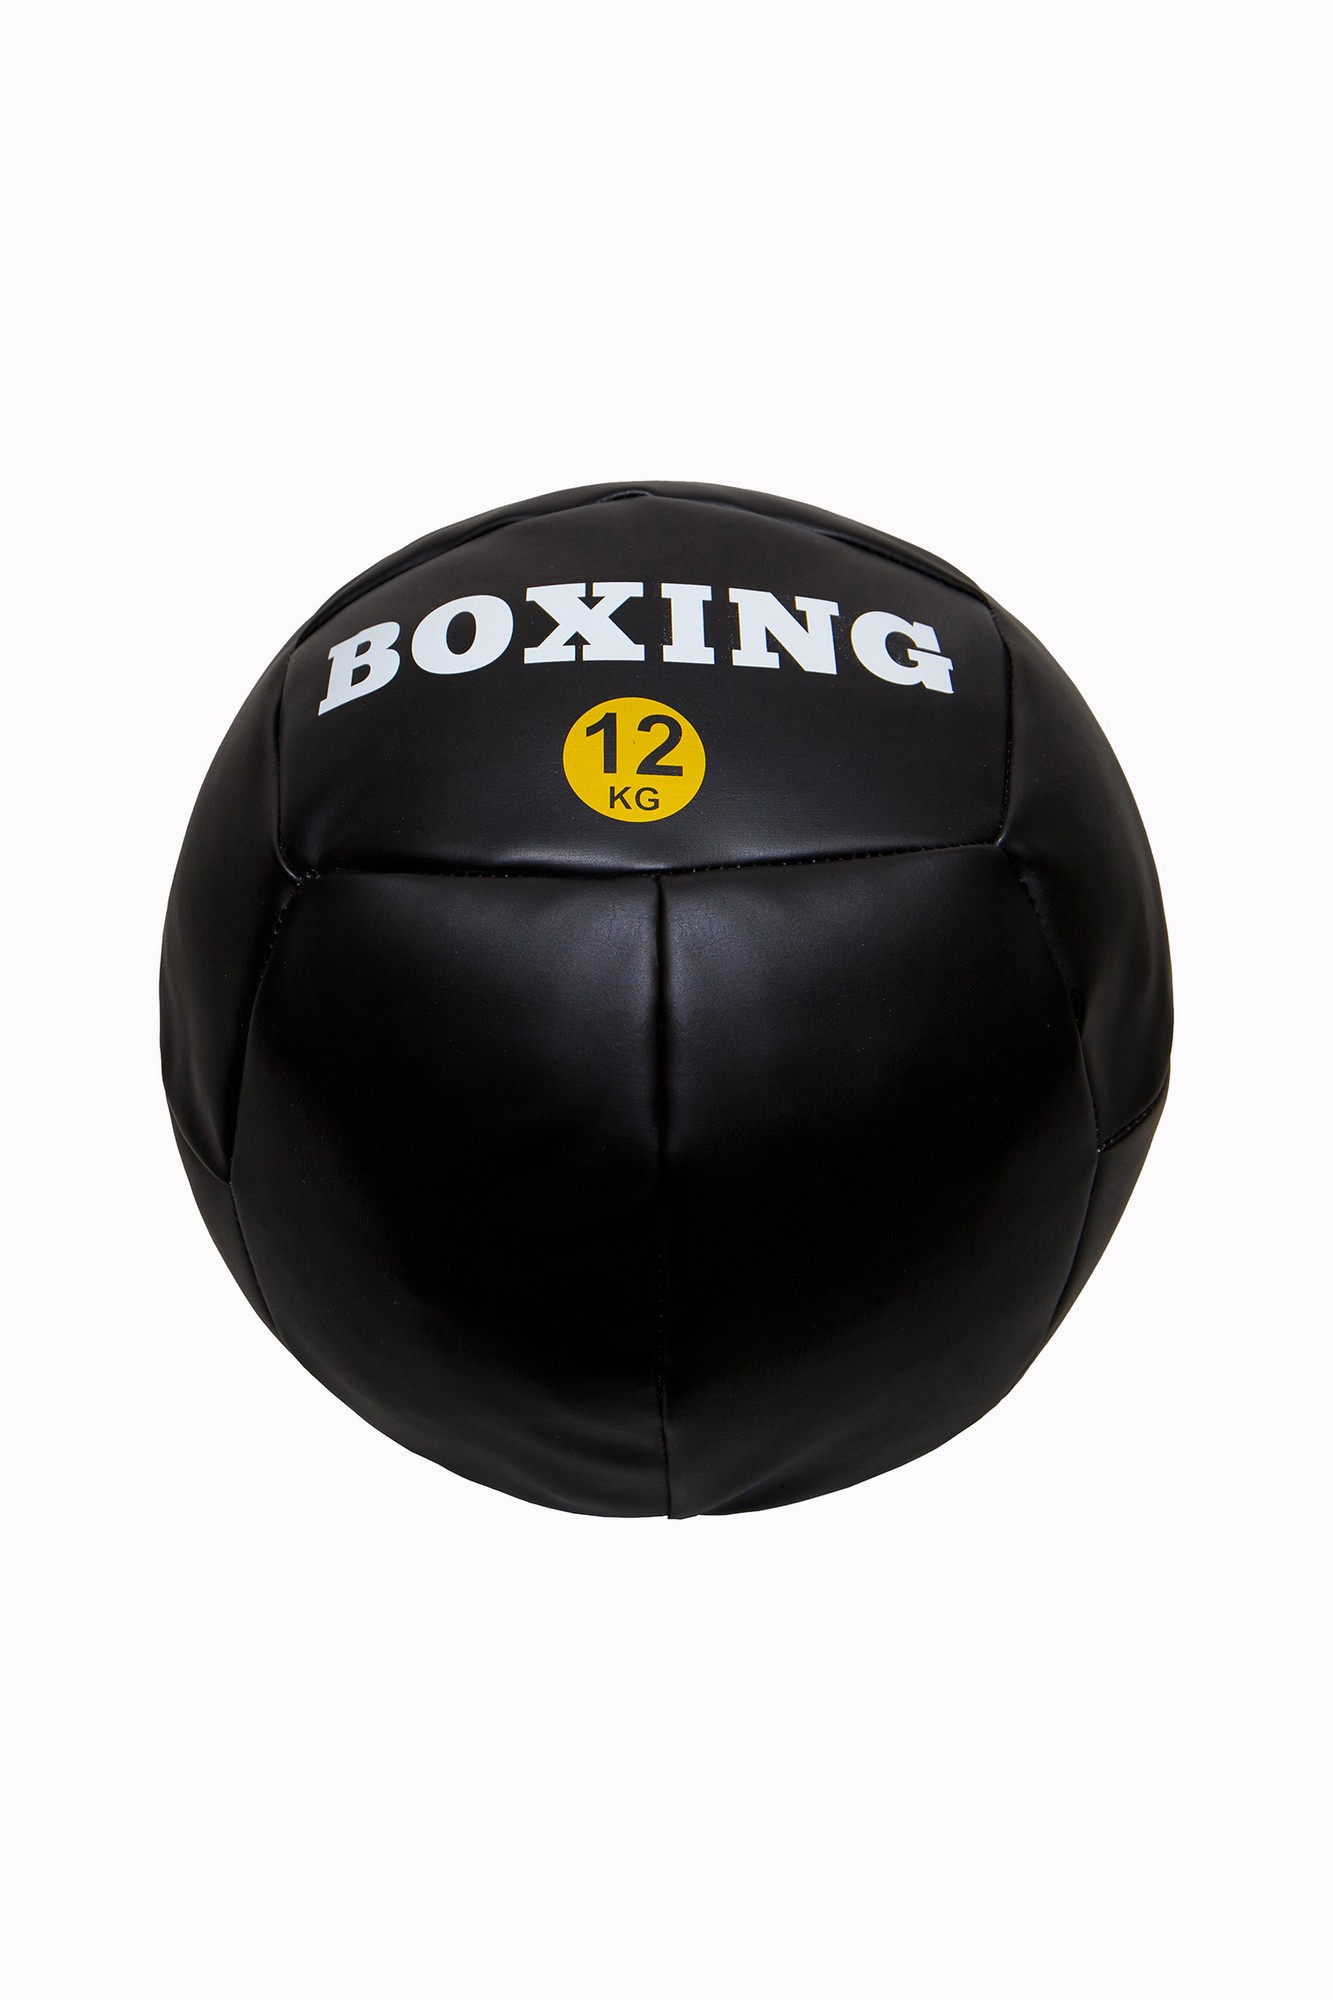 Медицинбол 12кг Totalbox Boxing МДИБ-12 1333_2000